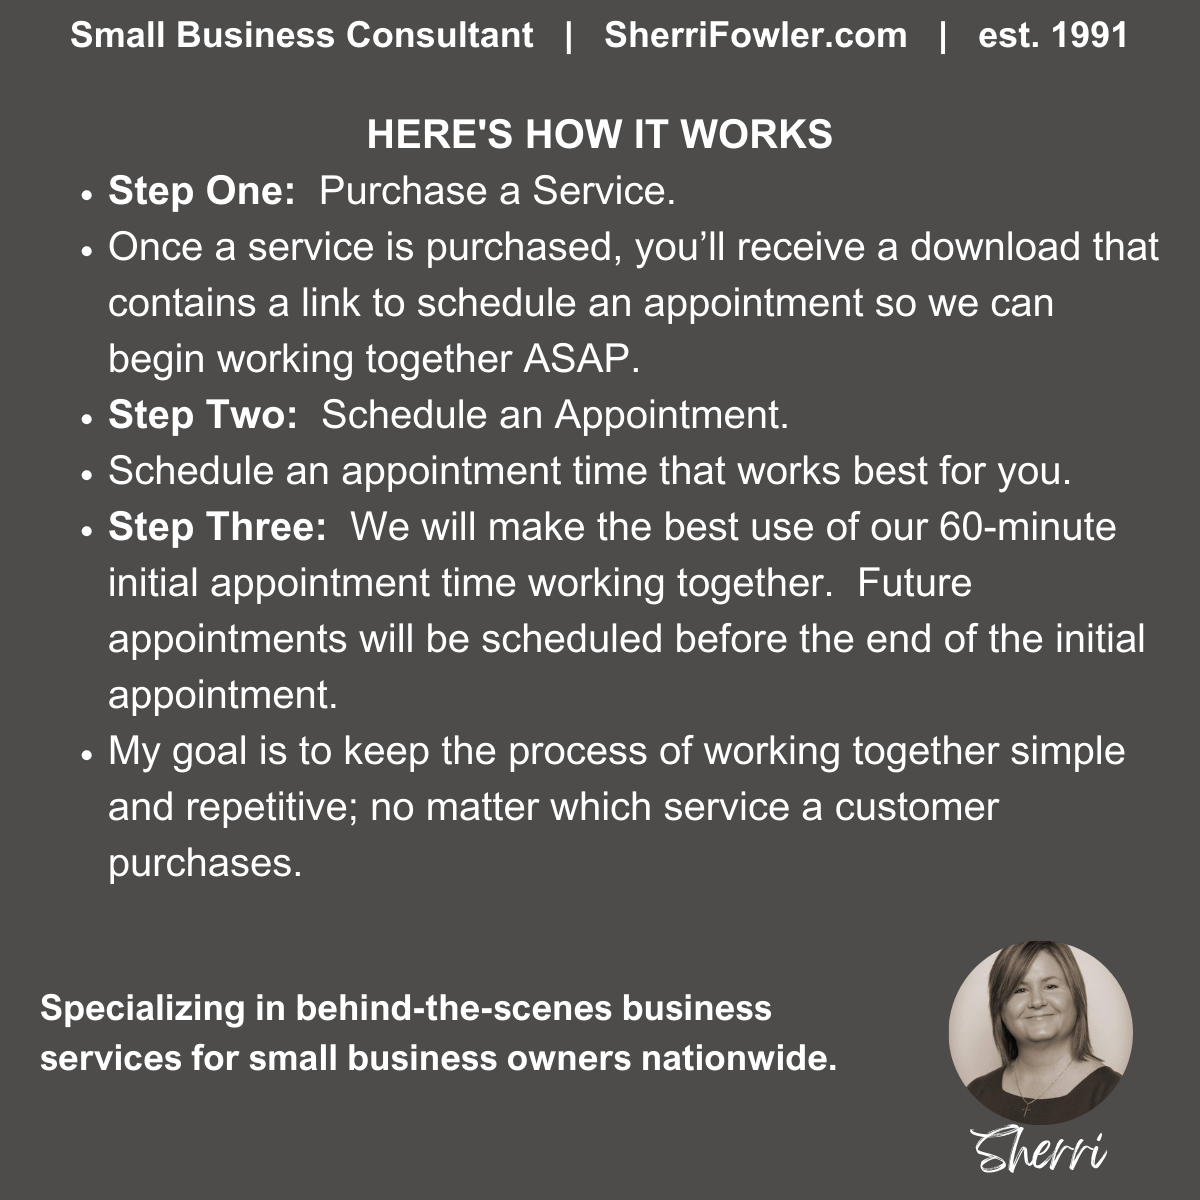 Sherri Smith provides business services to small business owners nationwide trhough SherriFowler.com